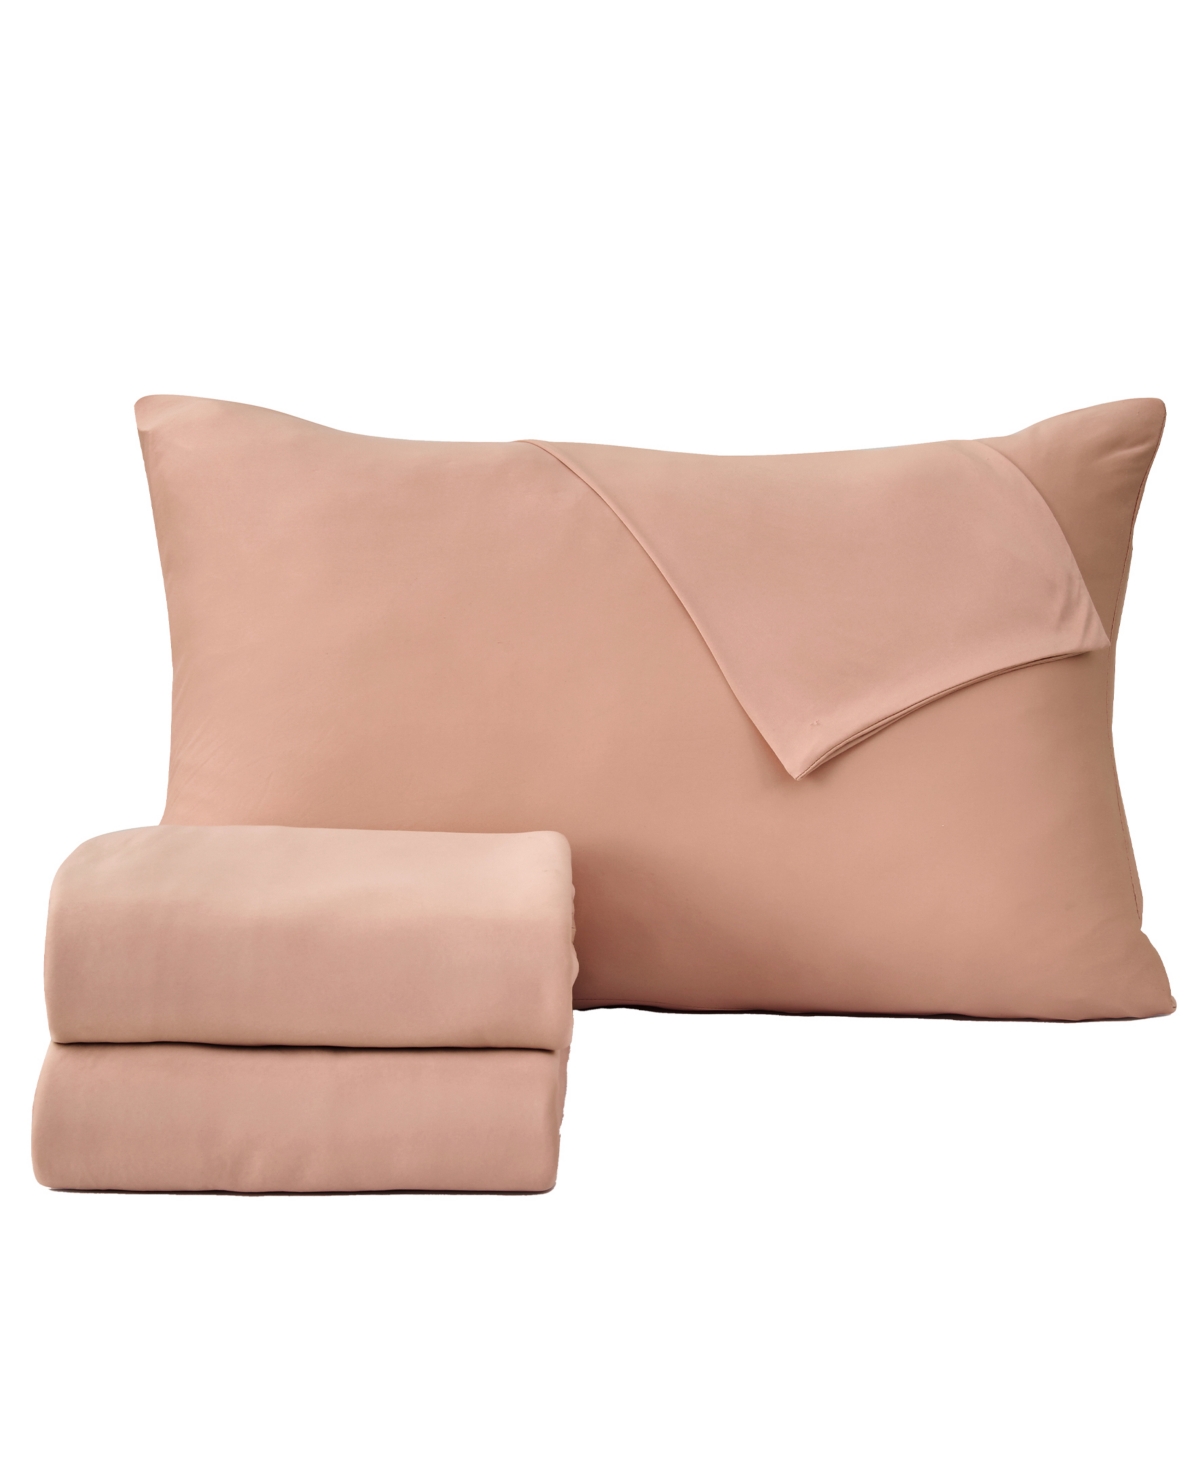 Premium Comforts Performance Cooling Super Soft Polyester 4 Piece Sheet Set, Twin Xl In Dusty Rose